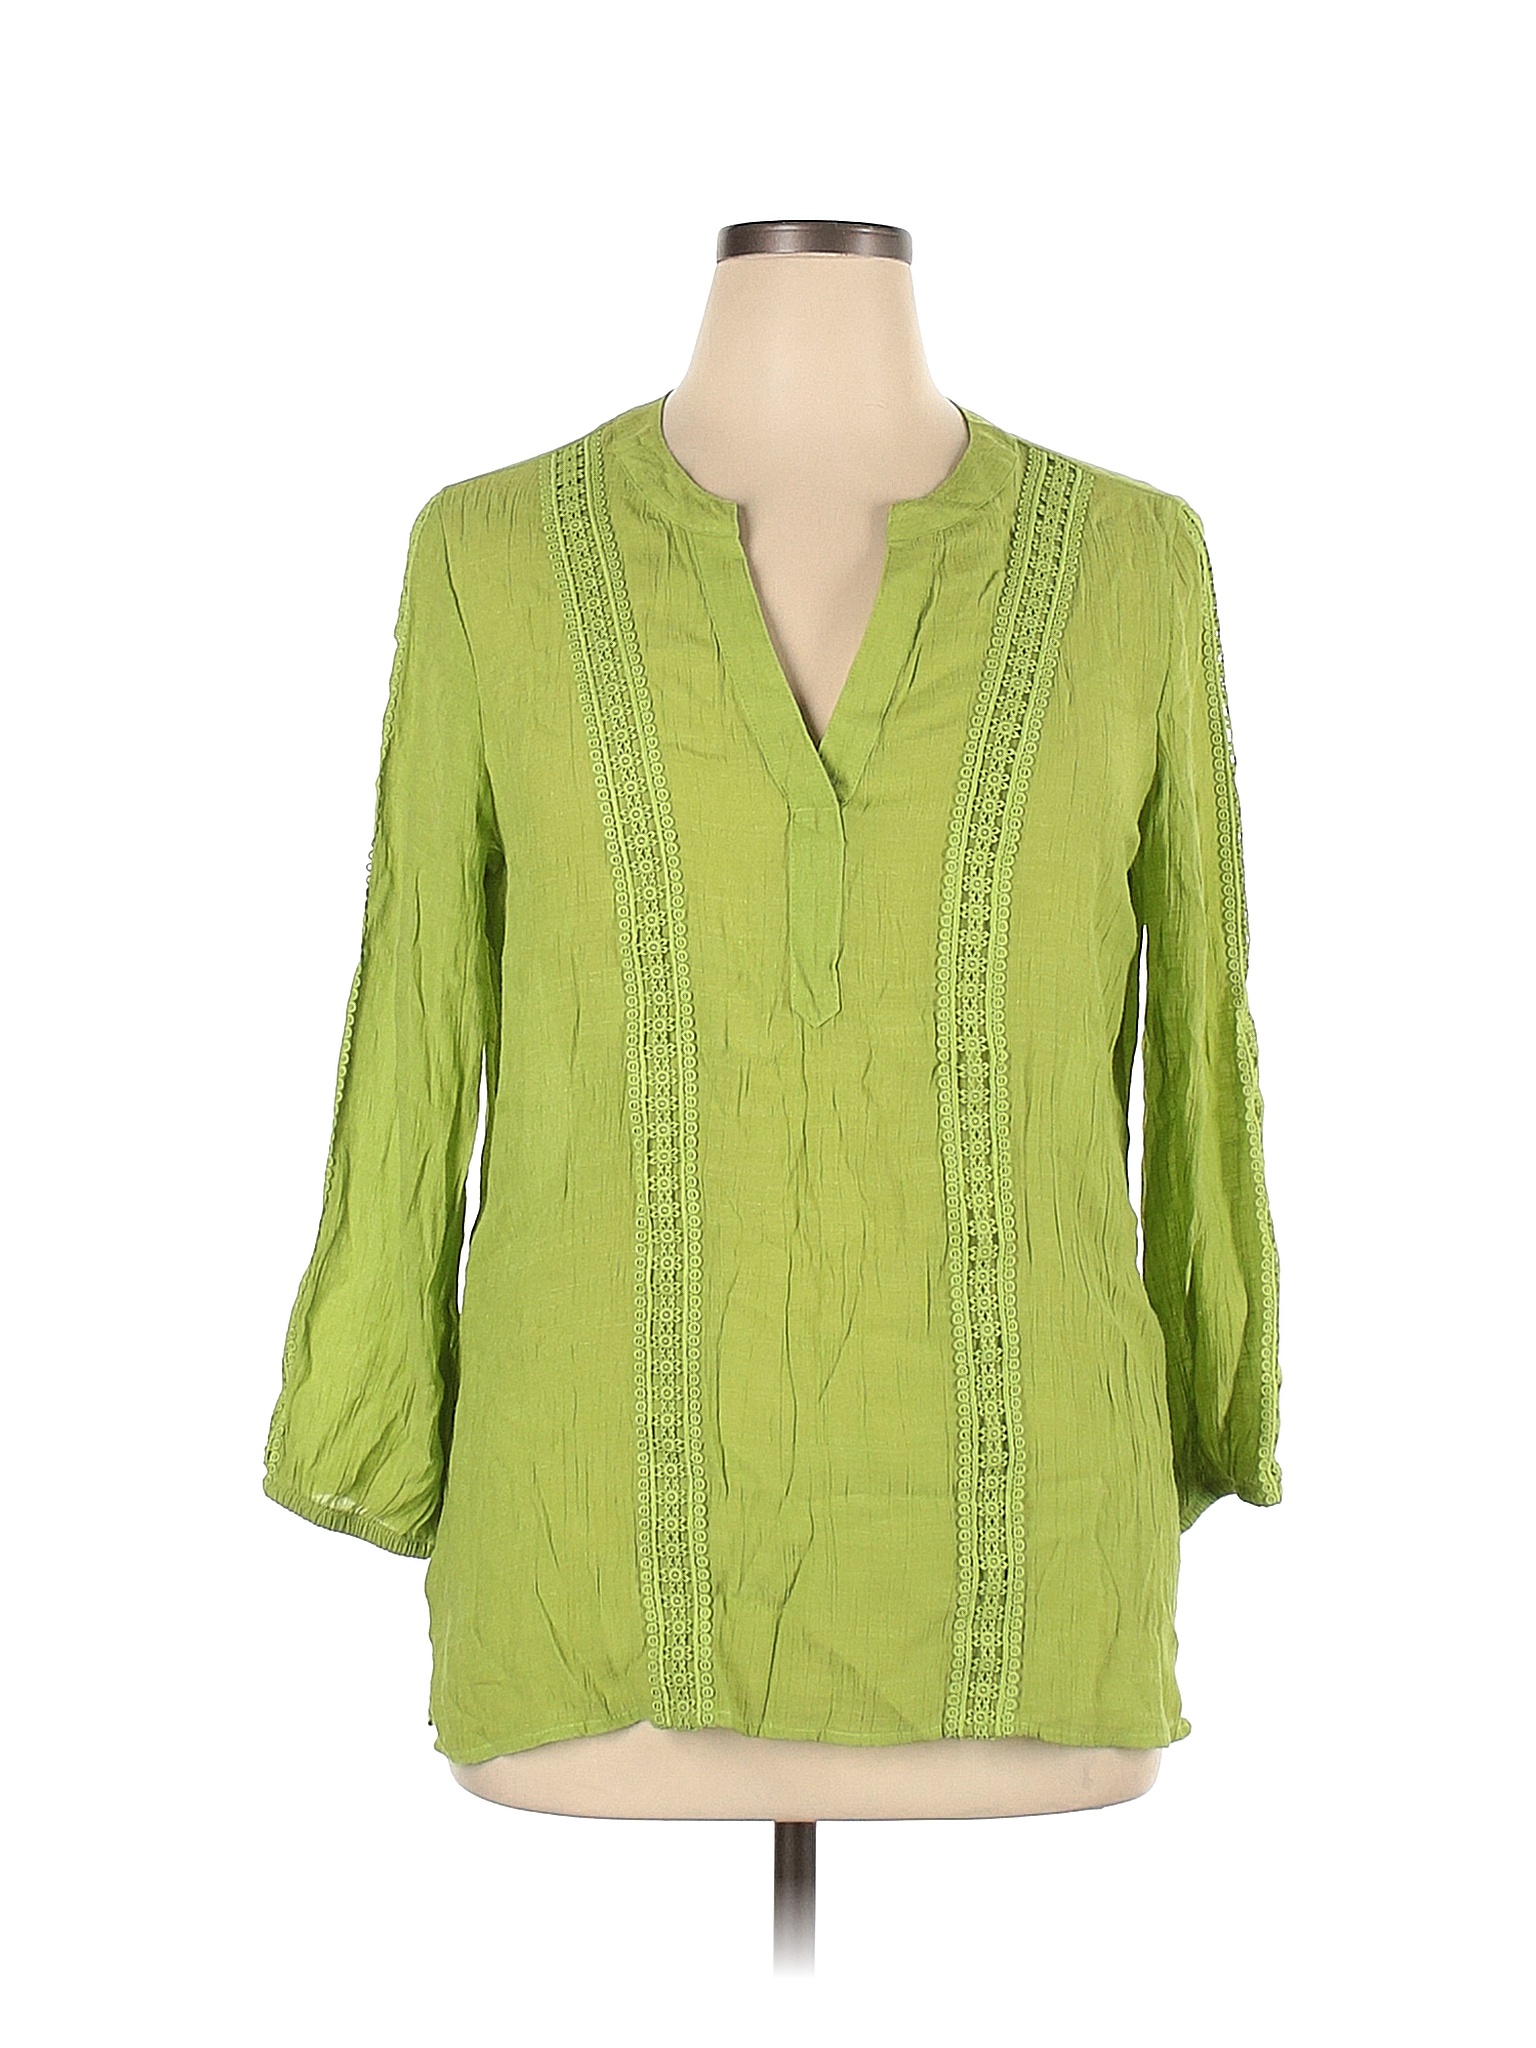 Counterparts Solid Colored Green Long Sleeve Blouse Size XL - 52% off ...